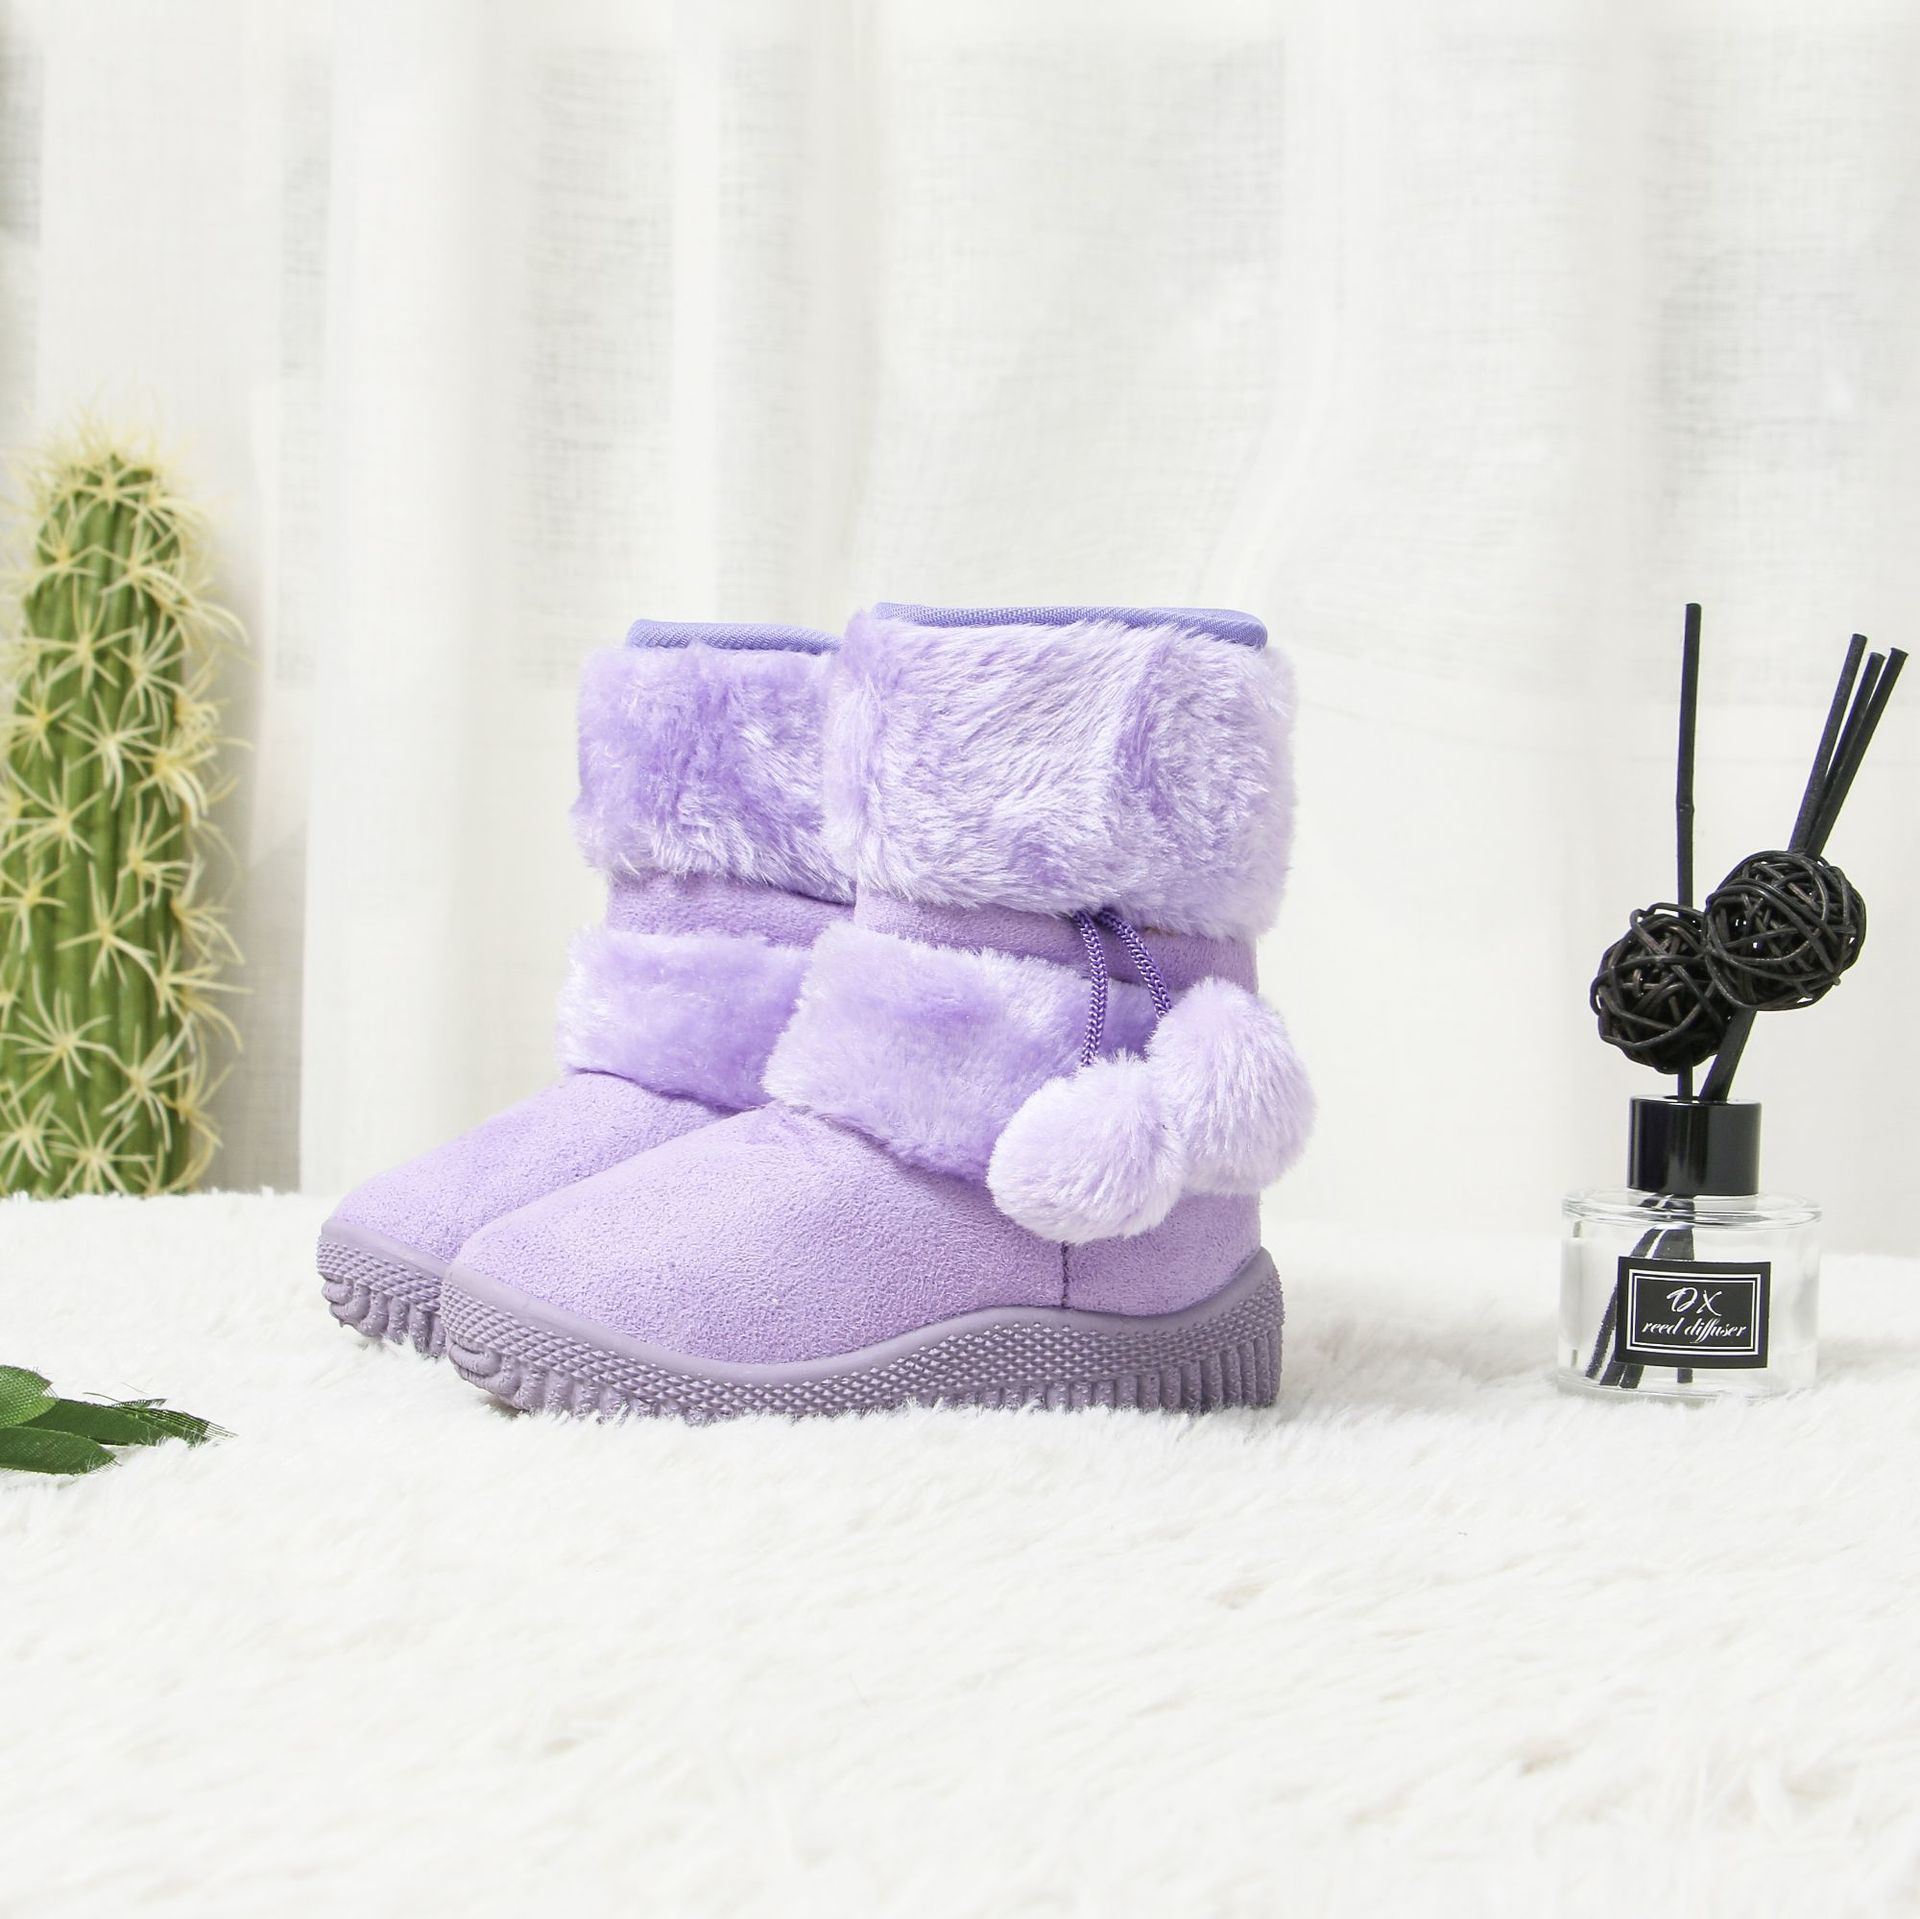 Classic Toddler Snow Boots Kids Cute POMPON Flock Winter Boots for Girls High Top Comfortable Warm Baby Girl Cotton Shoes C06272